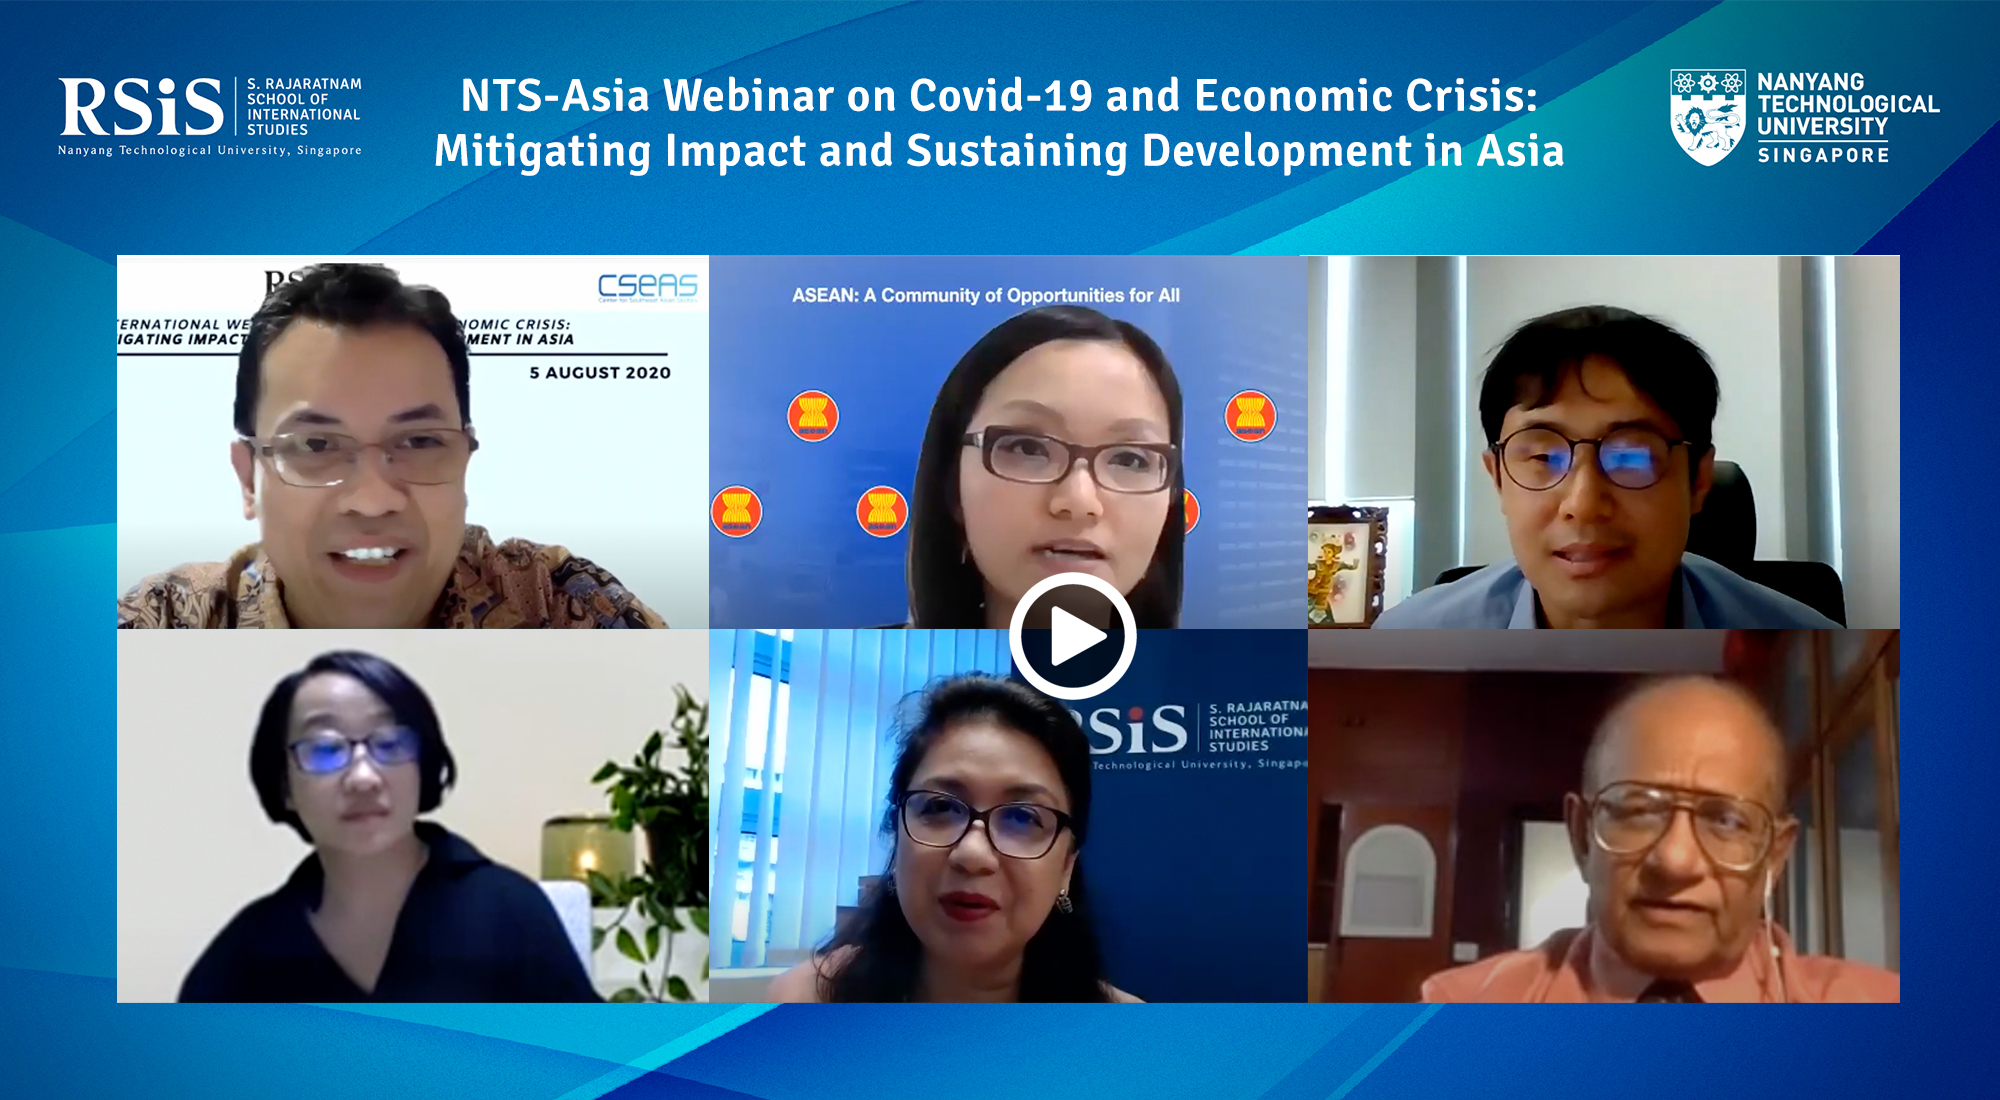 NTS-Asia Webinar on Covid-19 and Economic Crisis: Mitigating Impact and Sustaining Development in Asia